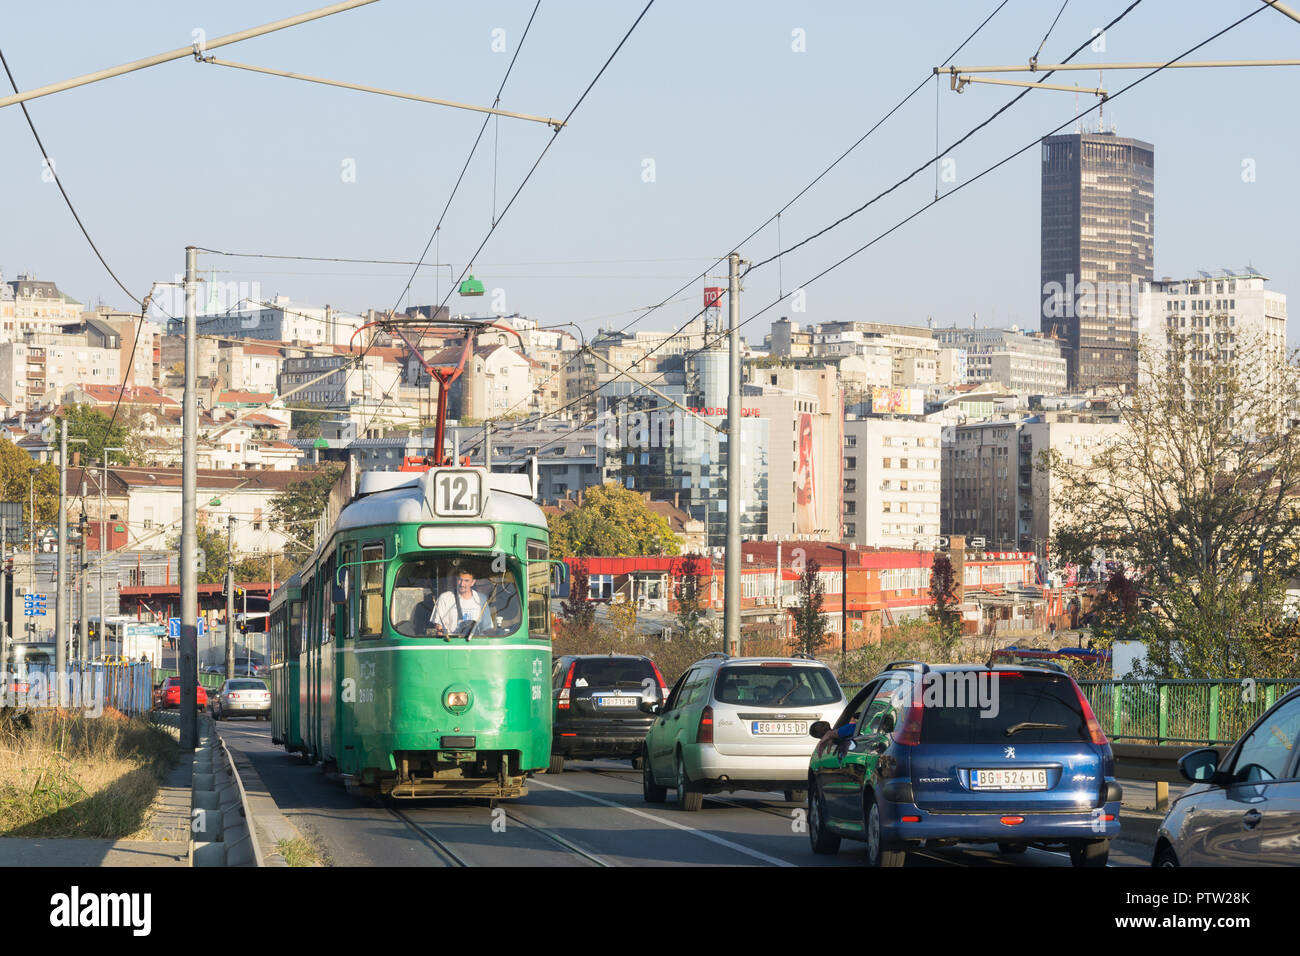 Belgrade cityscape - view of the Old Town (Stari Grad) and an old green tram. Stock Photo